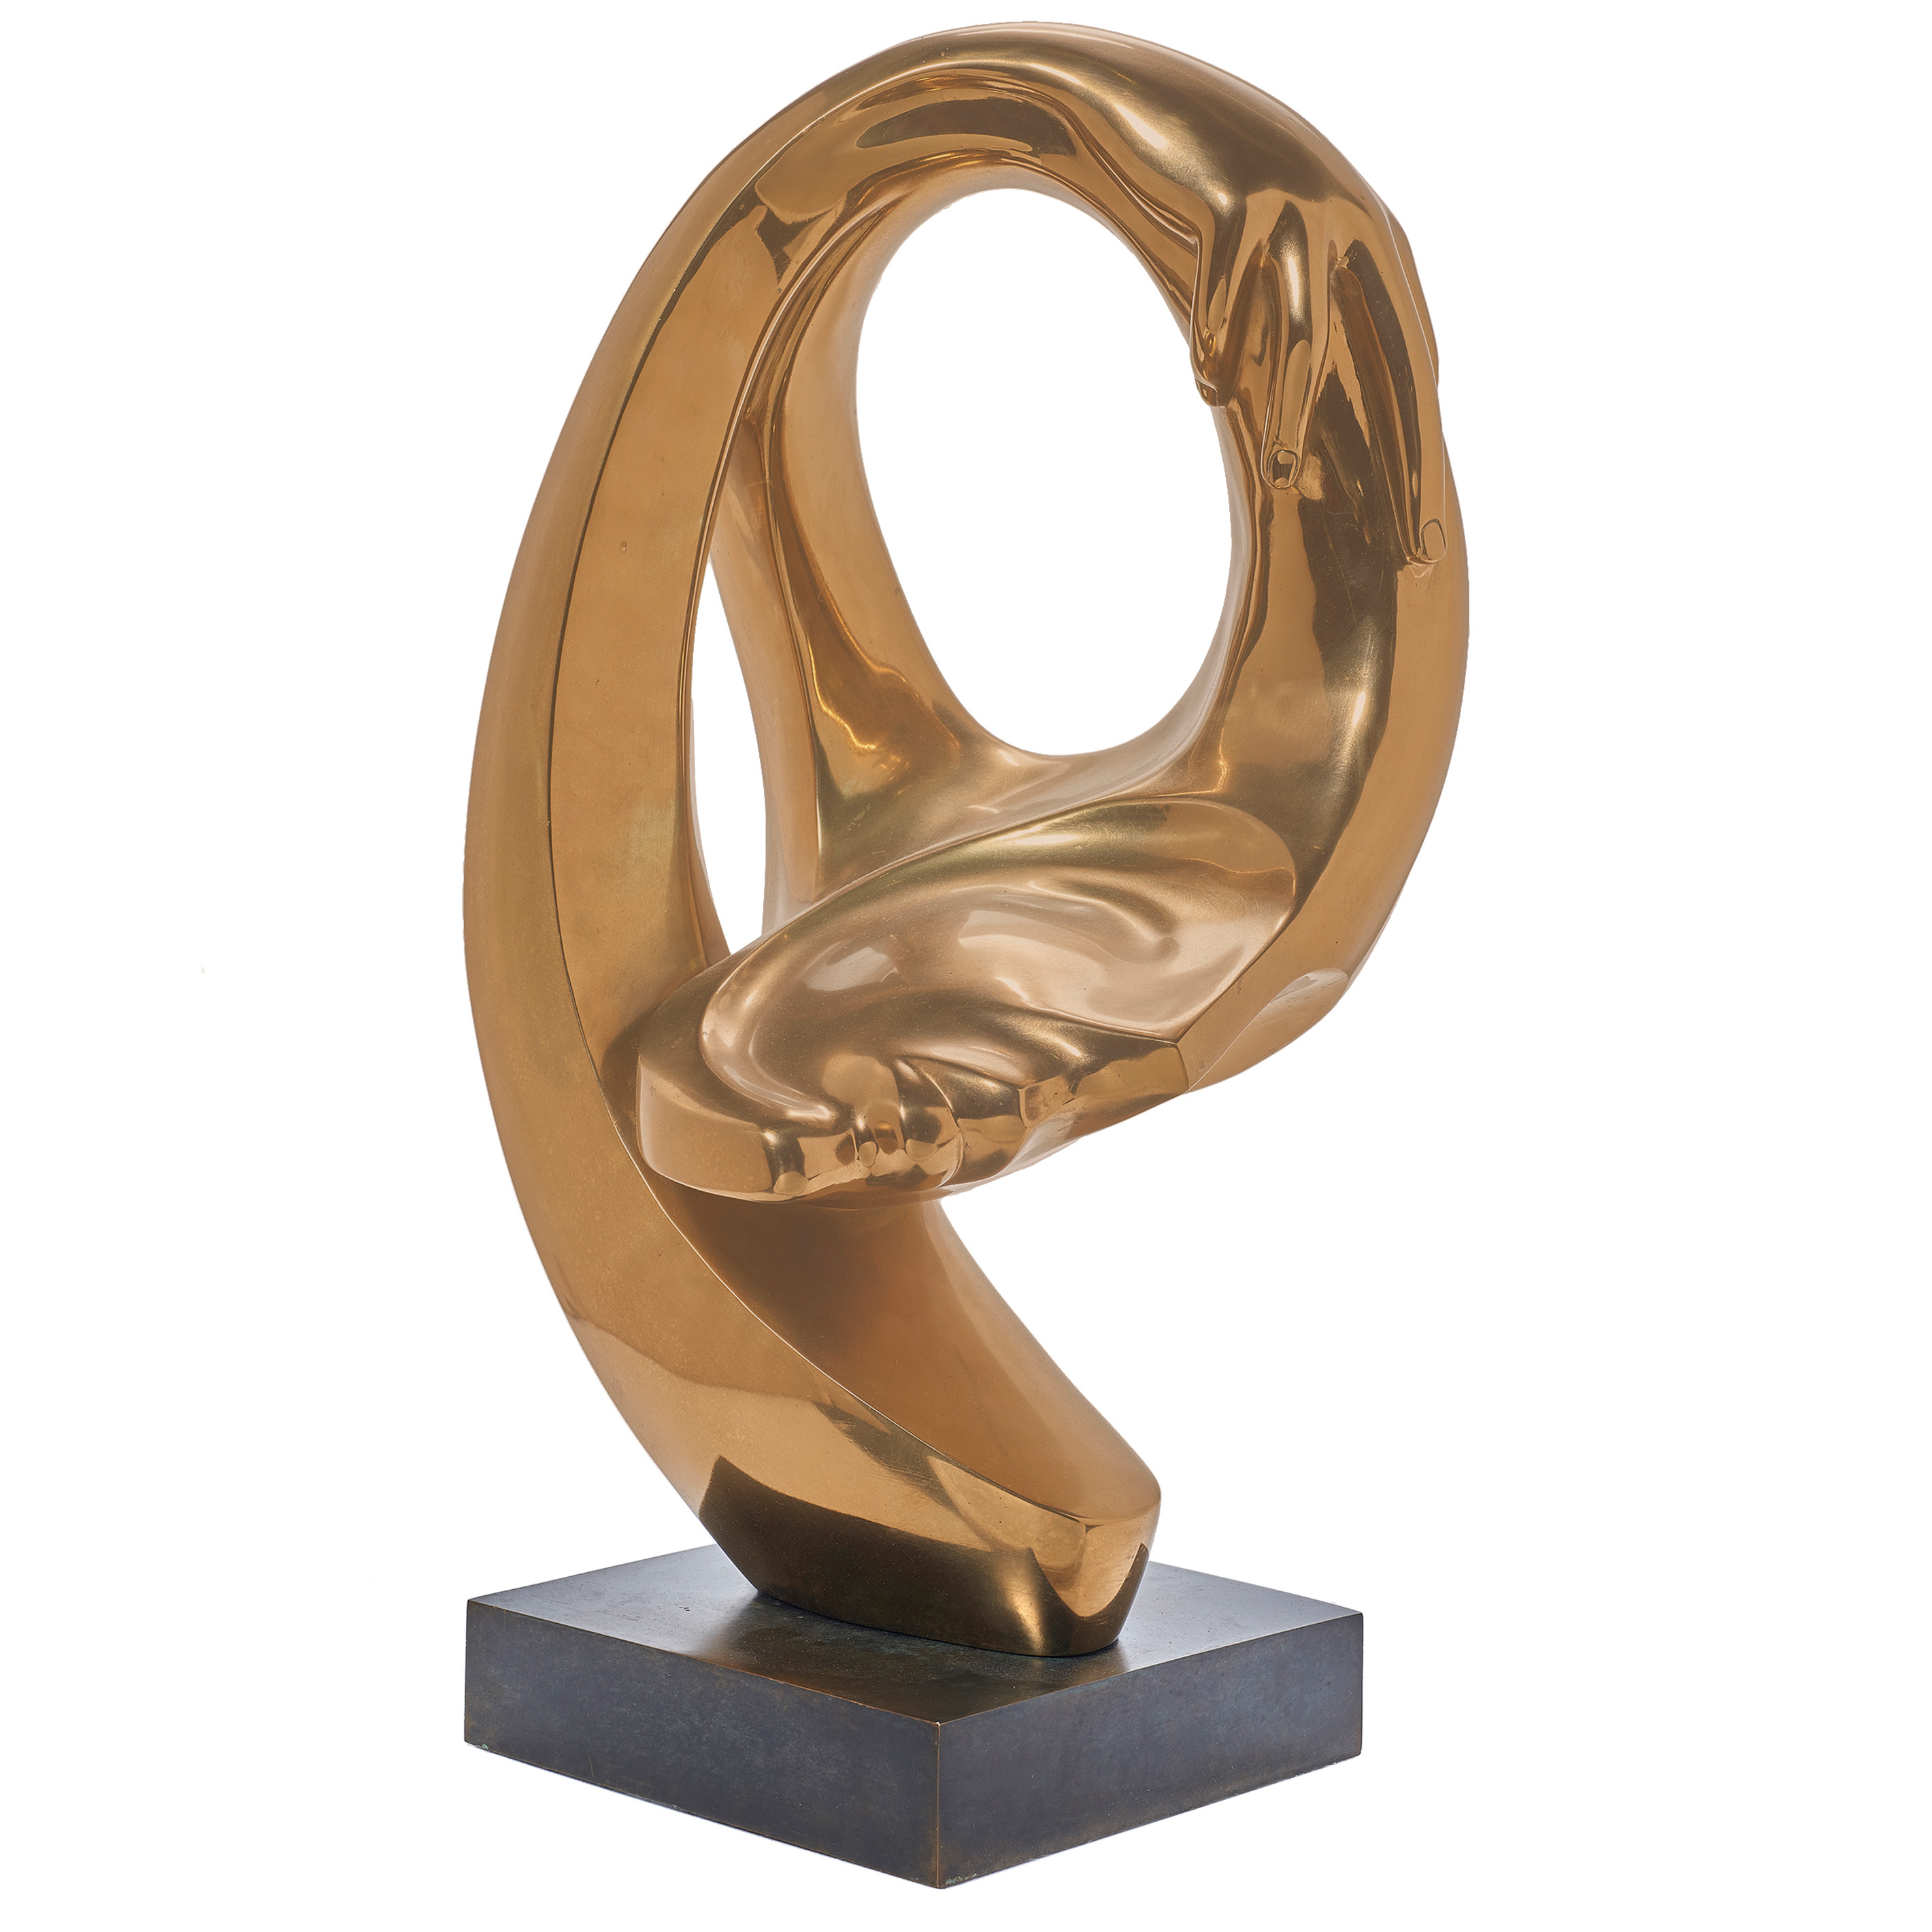 SCULPTURE ANTHONY QUINN Anthony 3a2eab